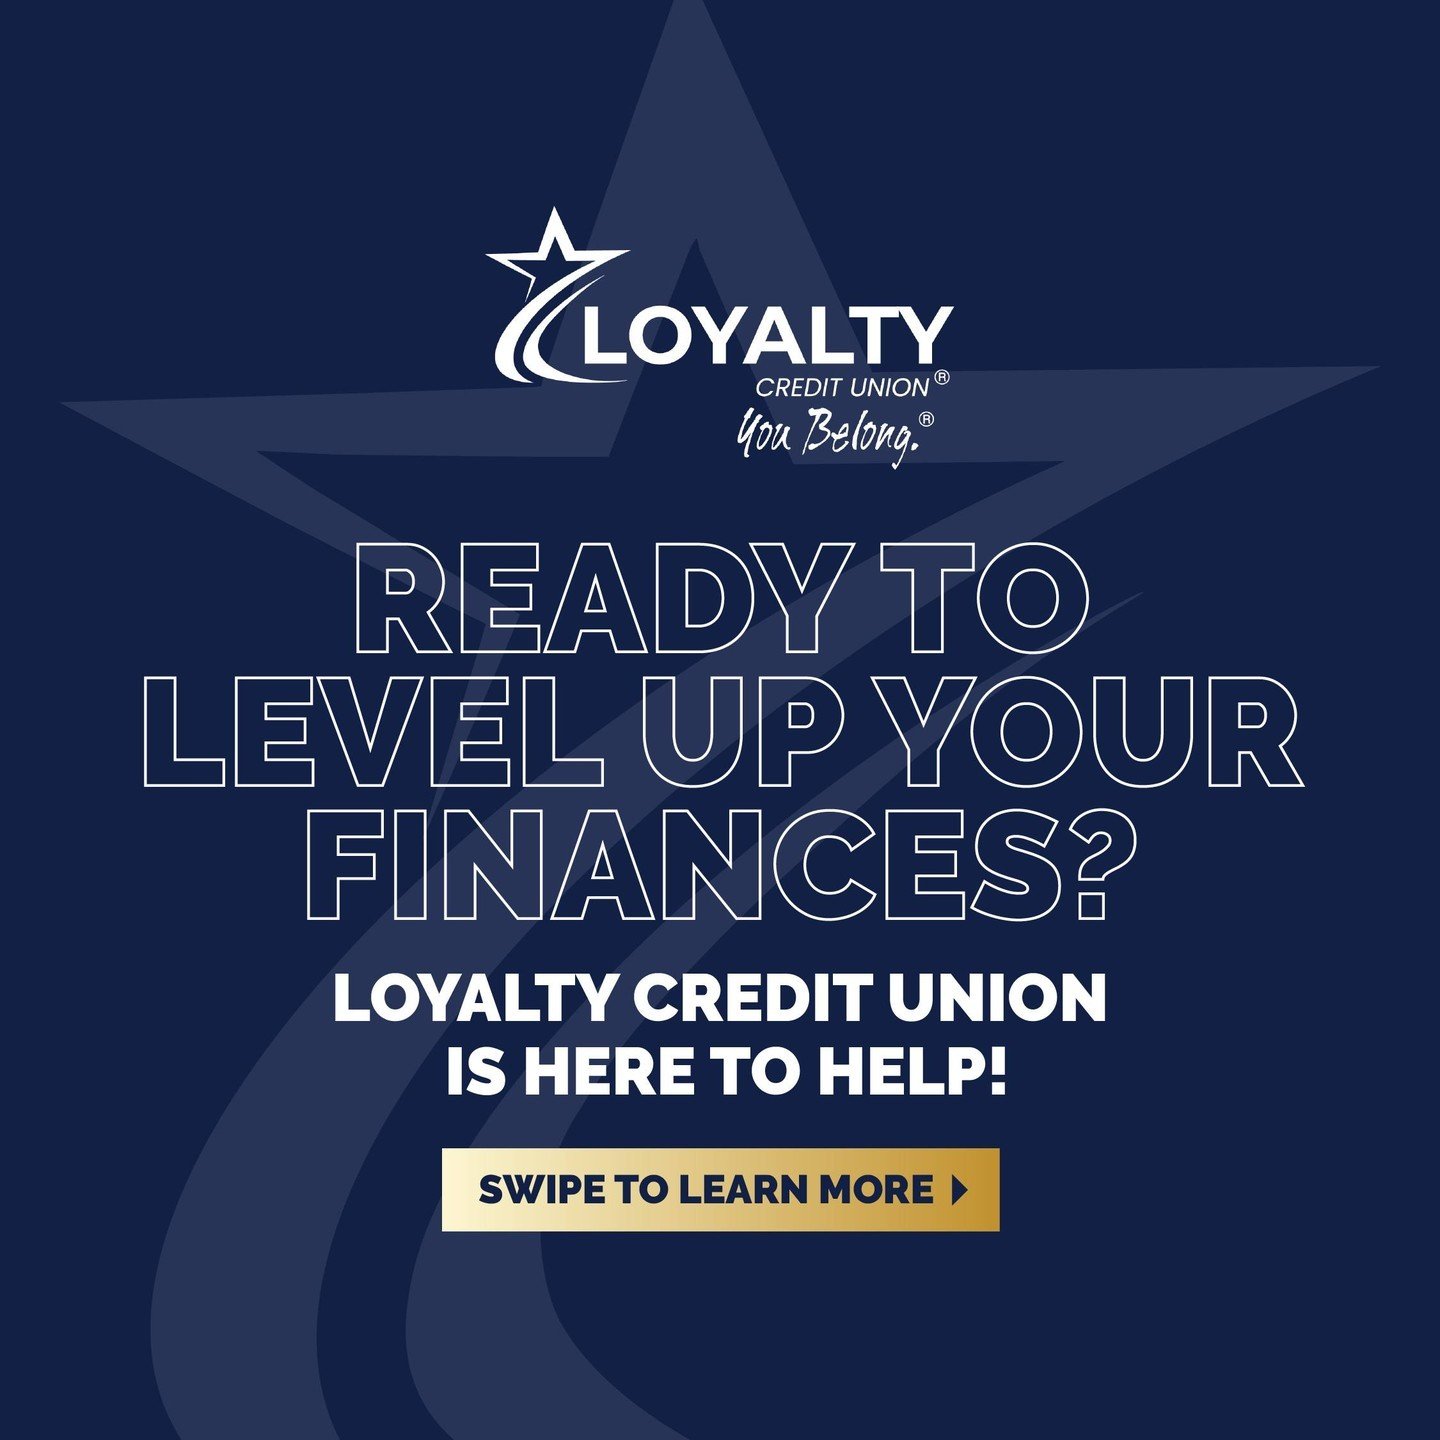 Ready to level up your finances? LOYALTY CU is here to help!

Swipe through for quick tips to stay on top of your money game.

Ready to learn more? Visit our education and security webpage for resources and tools! [Link in bio]

#GulfCoastLife
#Flori